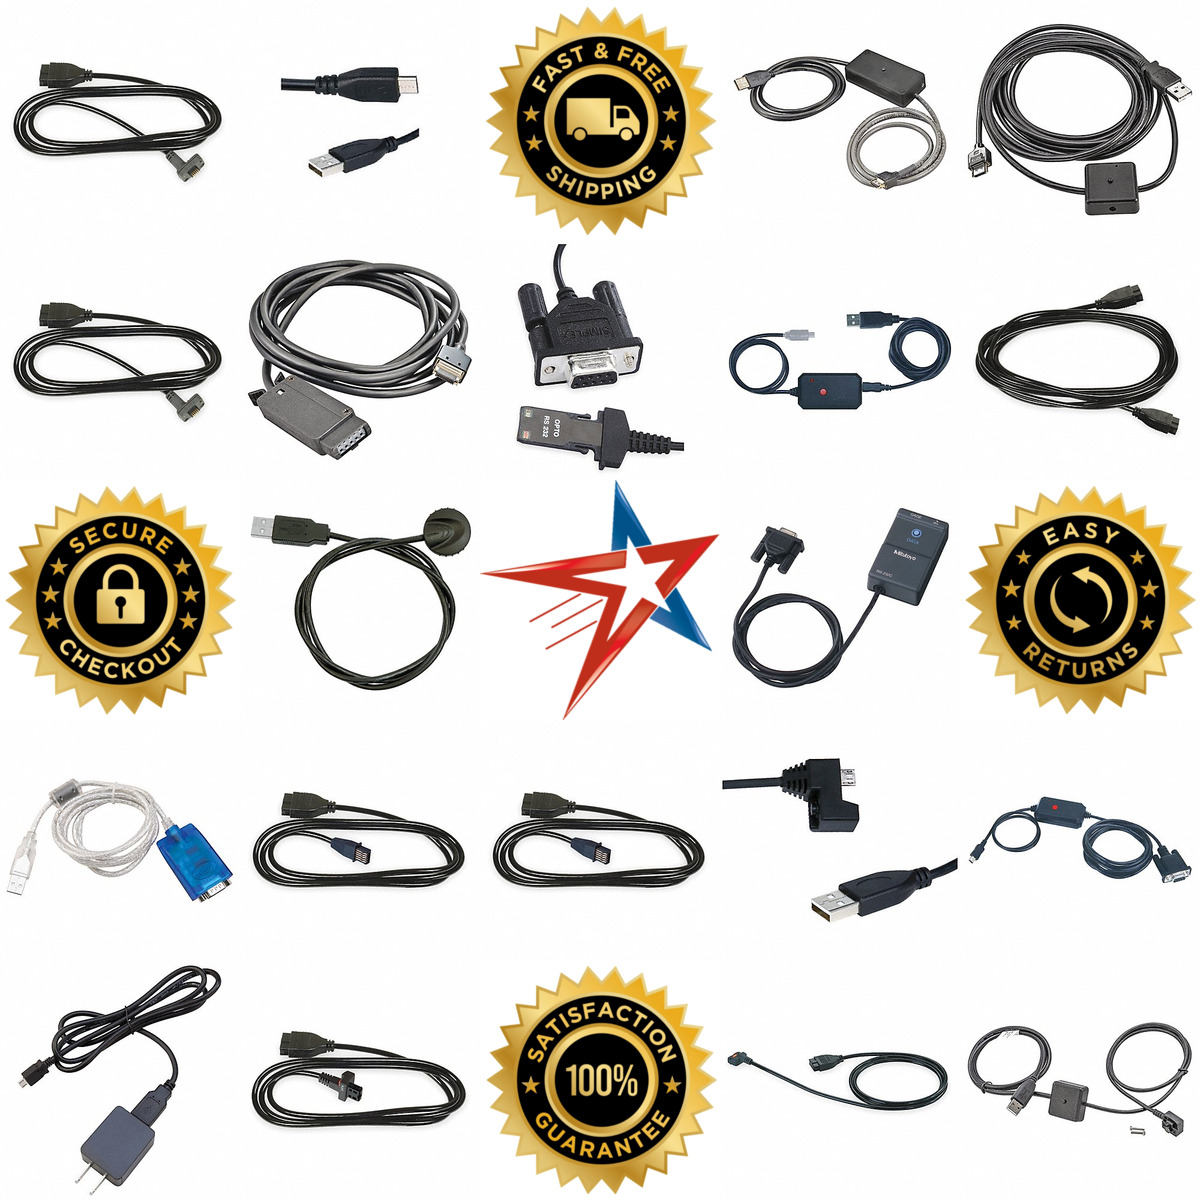 A selection of Spc Cables and Adapters products on GoVets